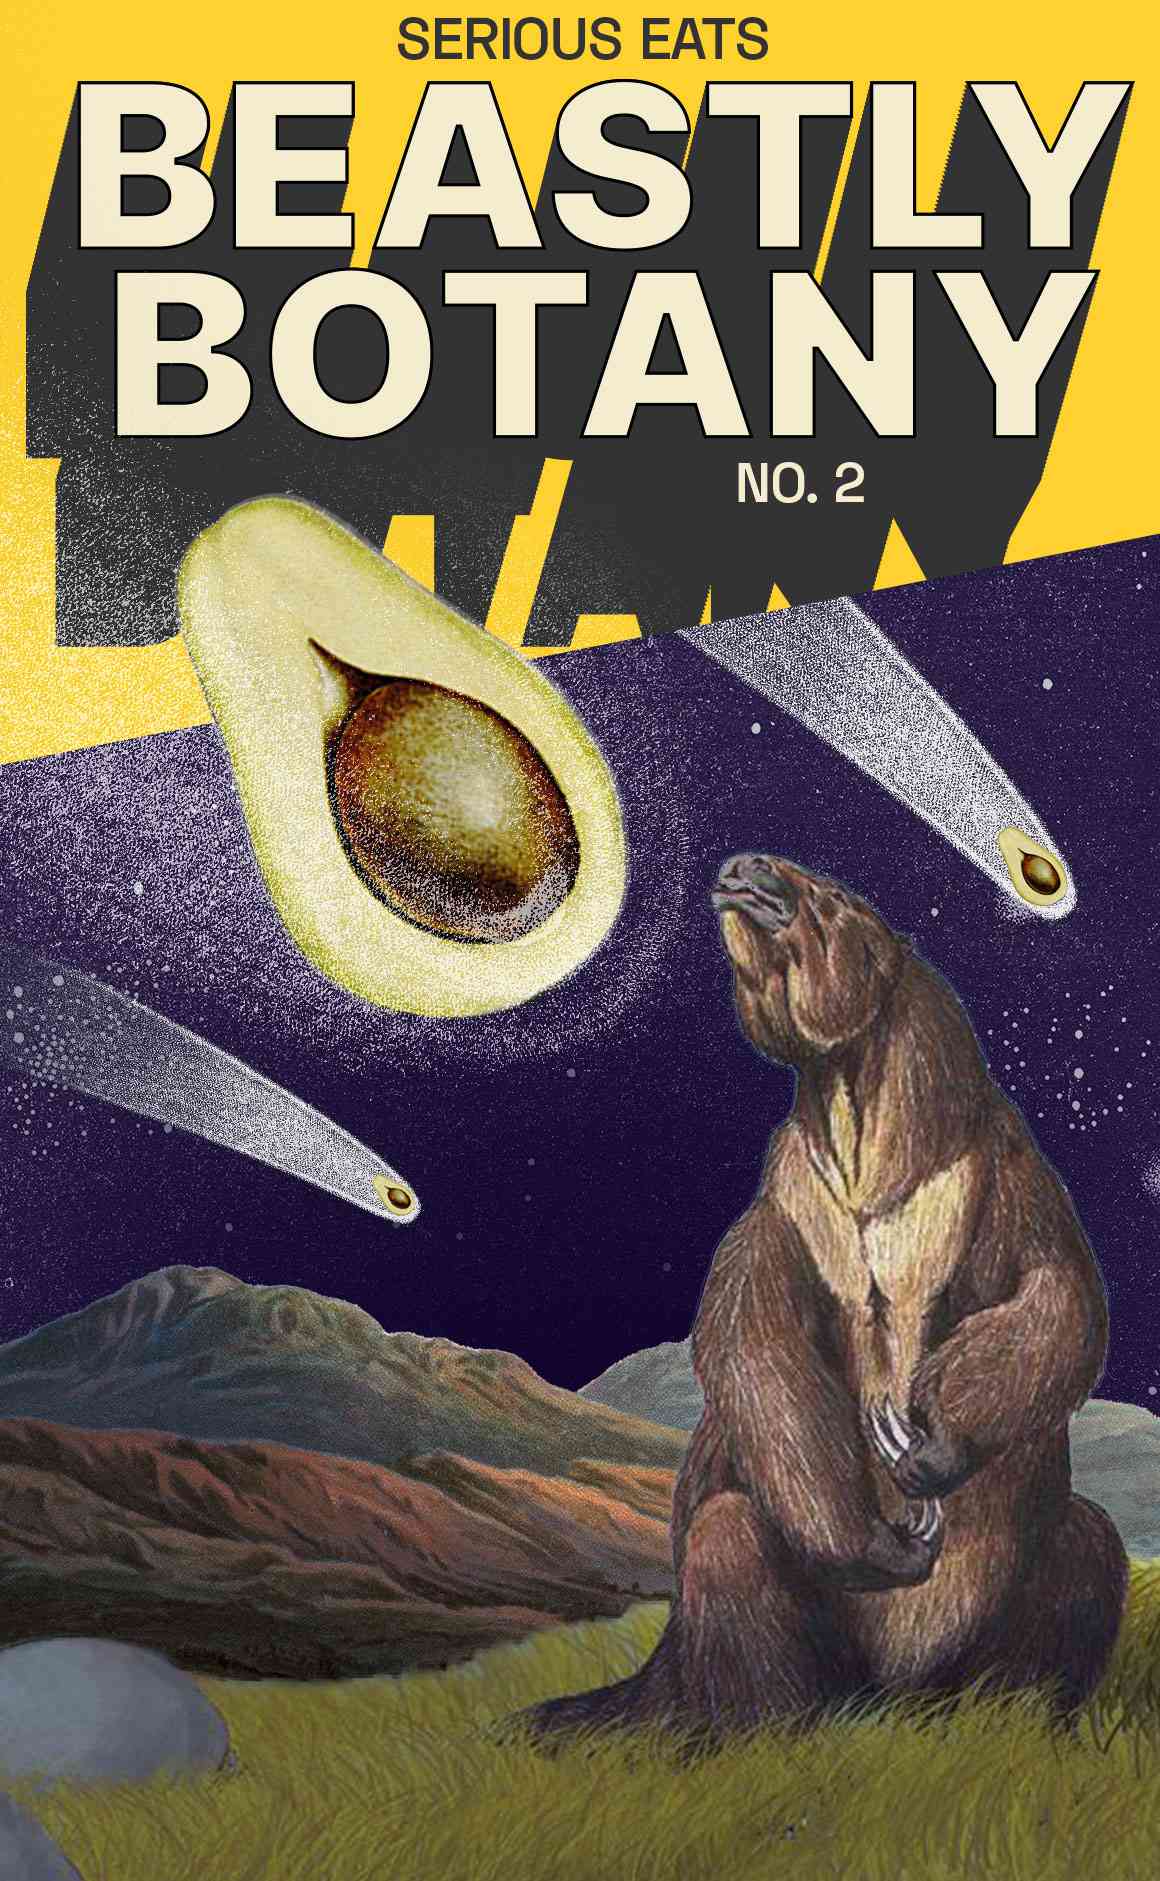 Pulp Fiction cover of a avocado attacking a sloth